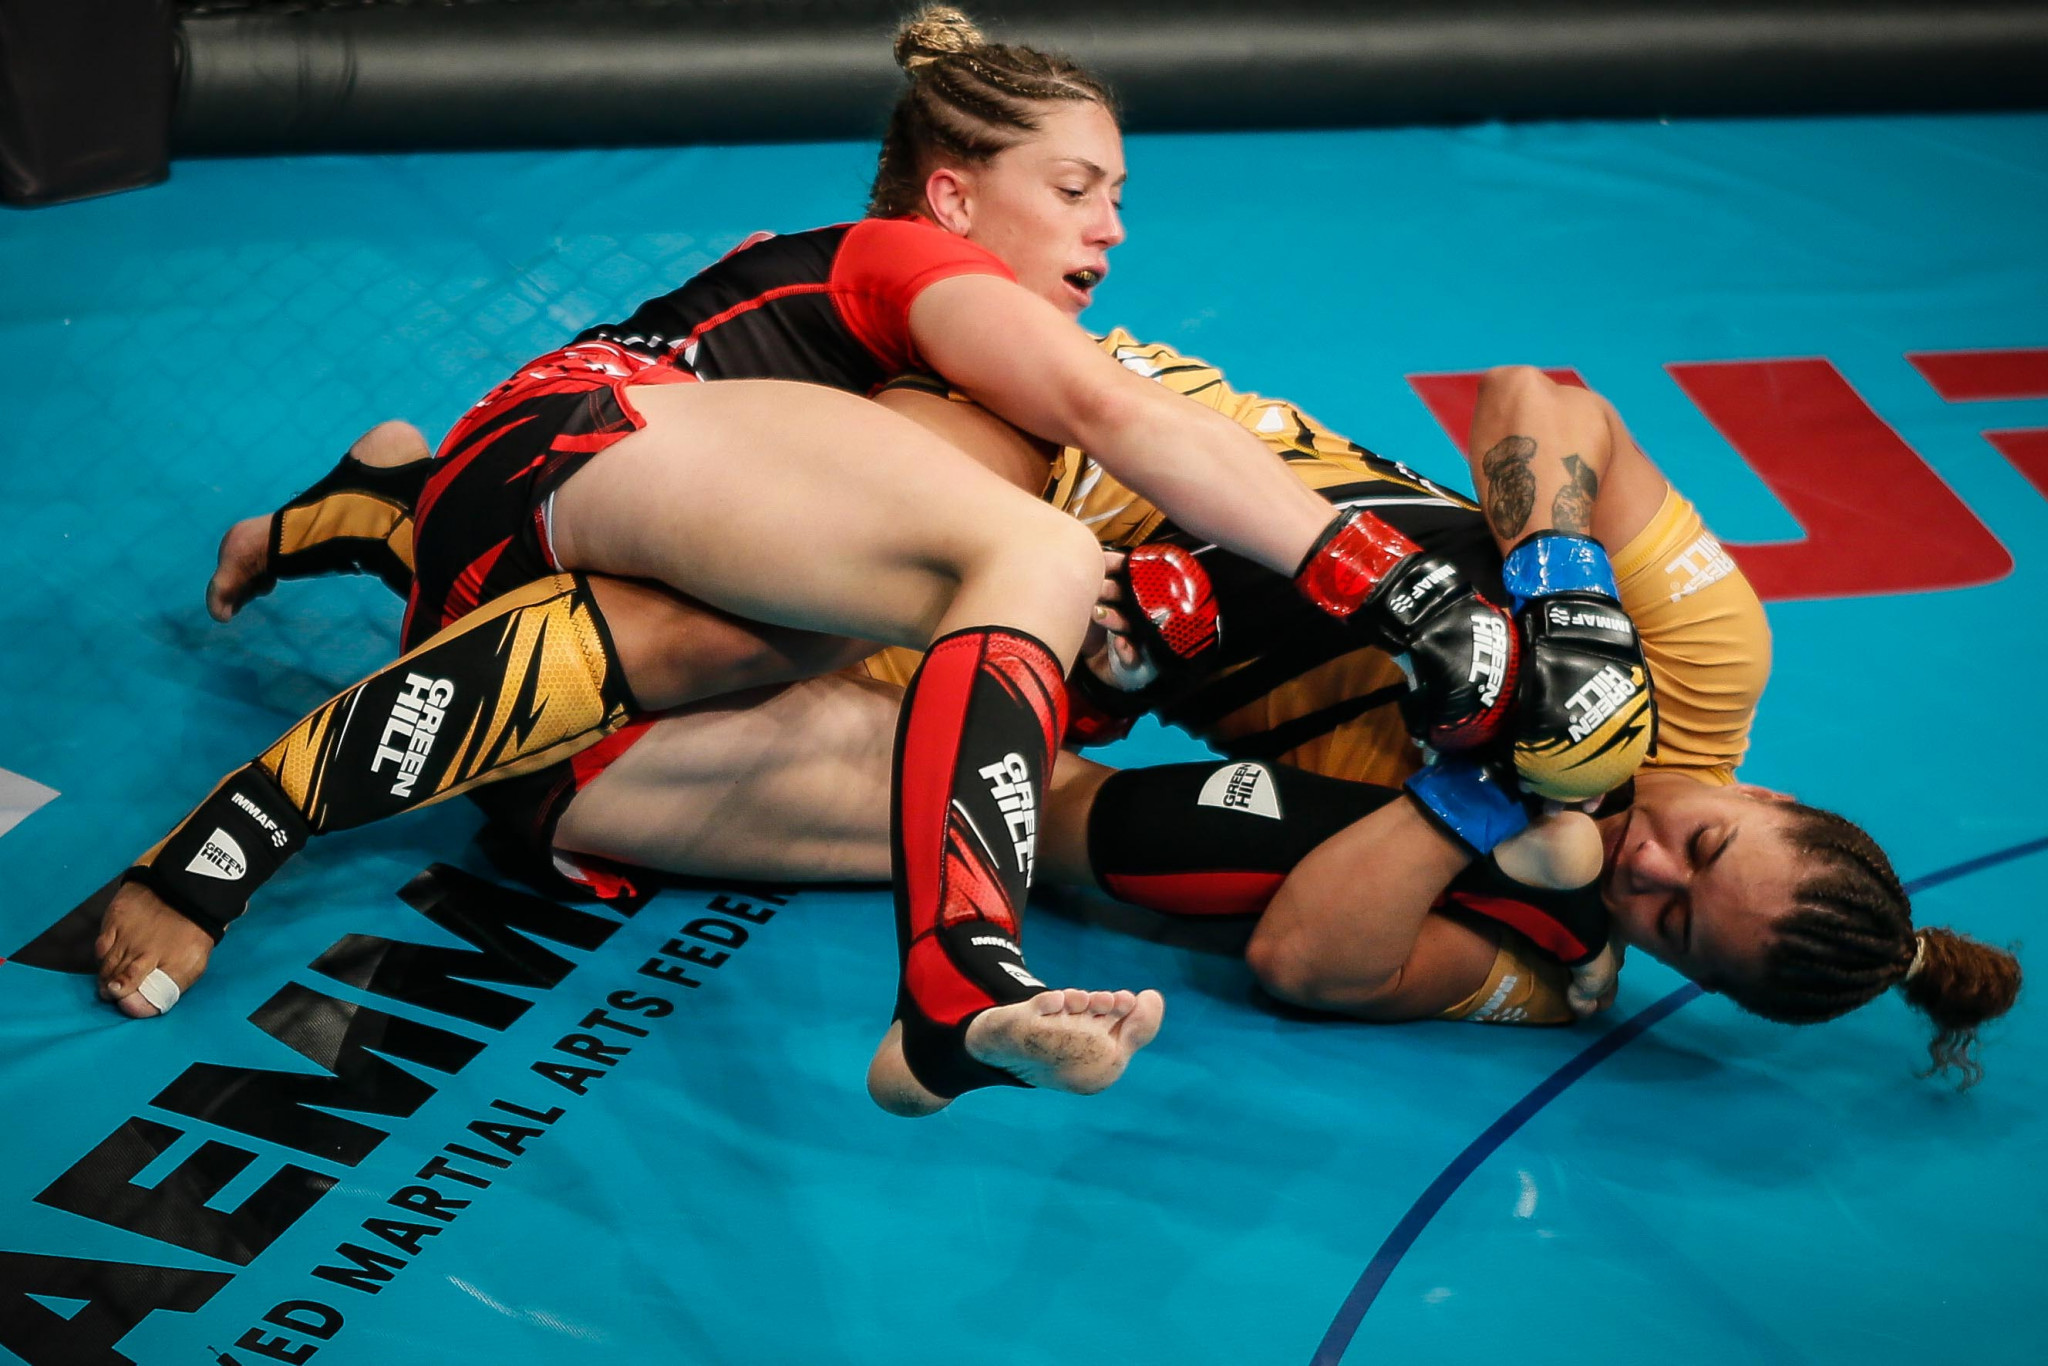 IMMAF is seeking to increase the participation of women in mixed martial arts ©IMMAF